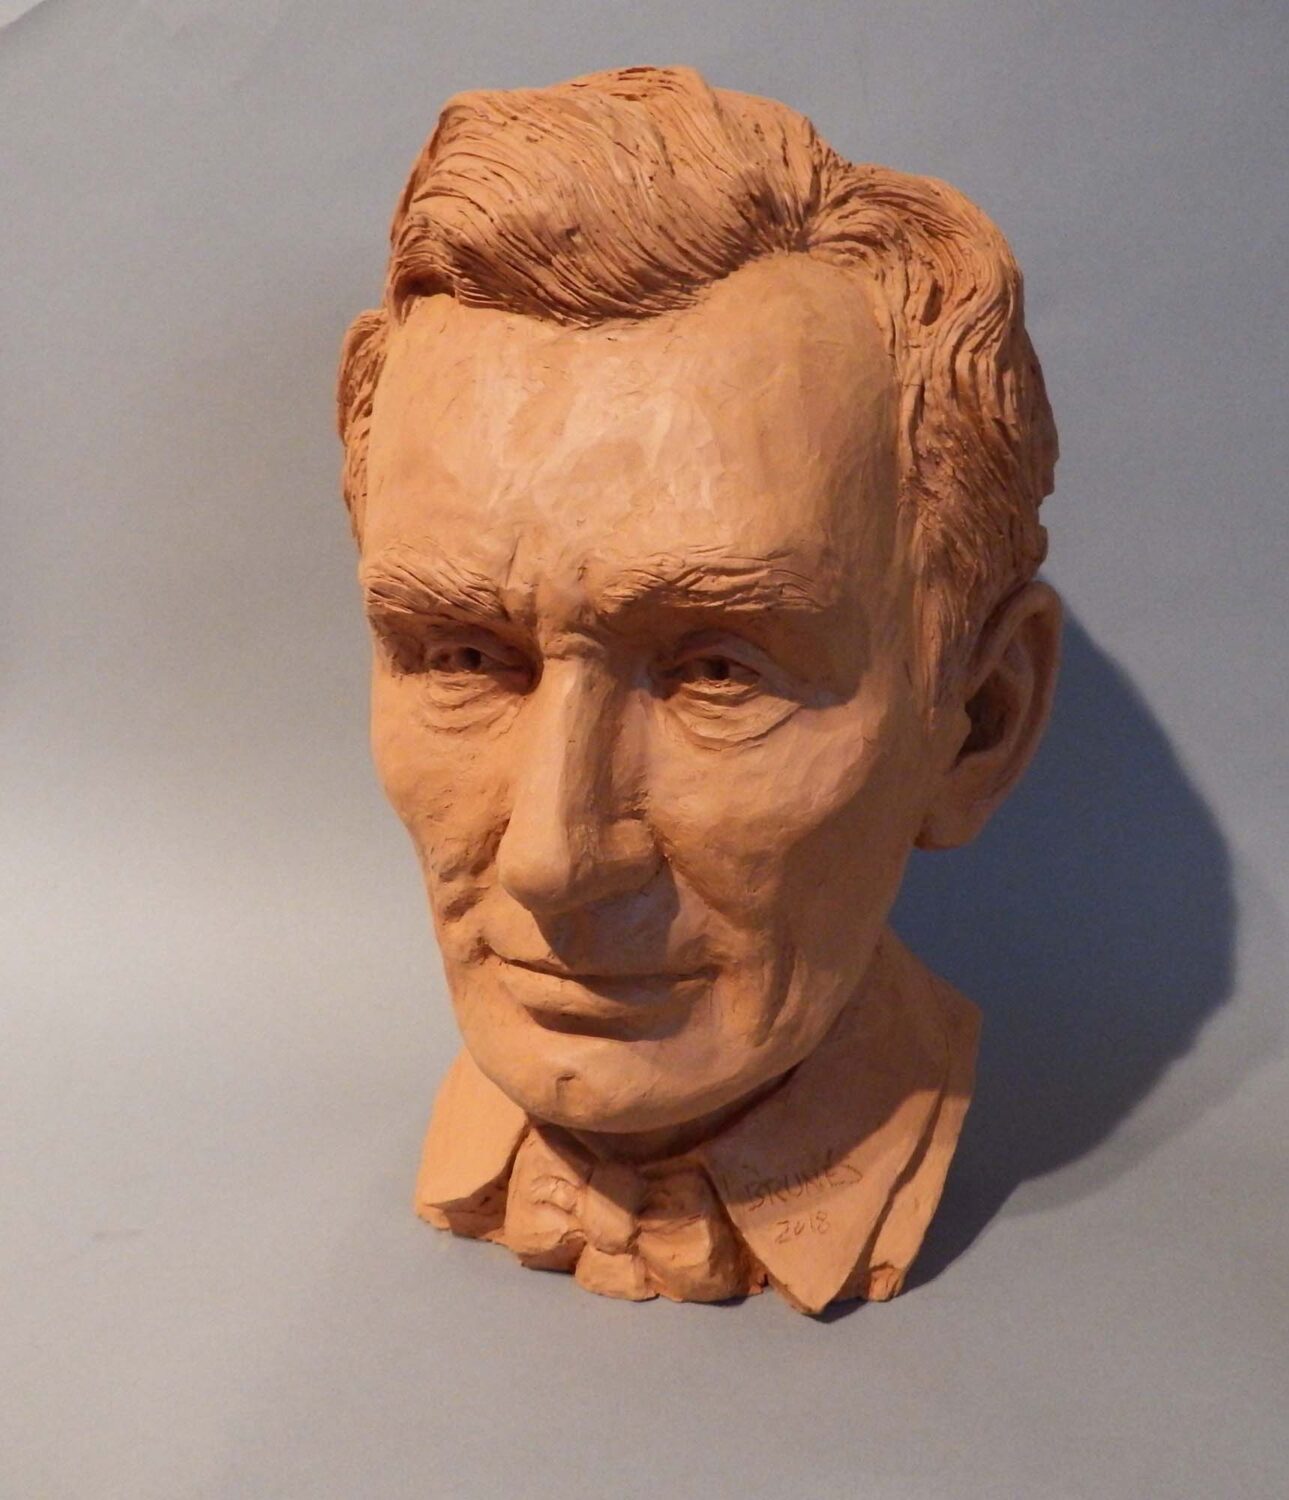 thumbnail of Sculpture of Abraham Lincoln made out of Terra Cotta.